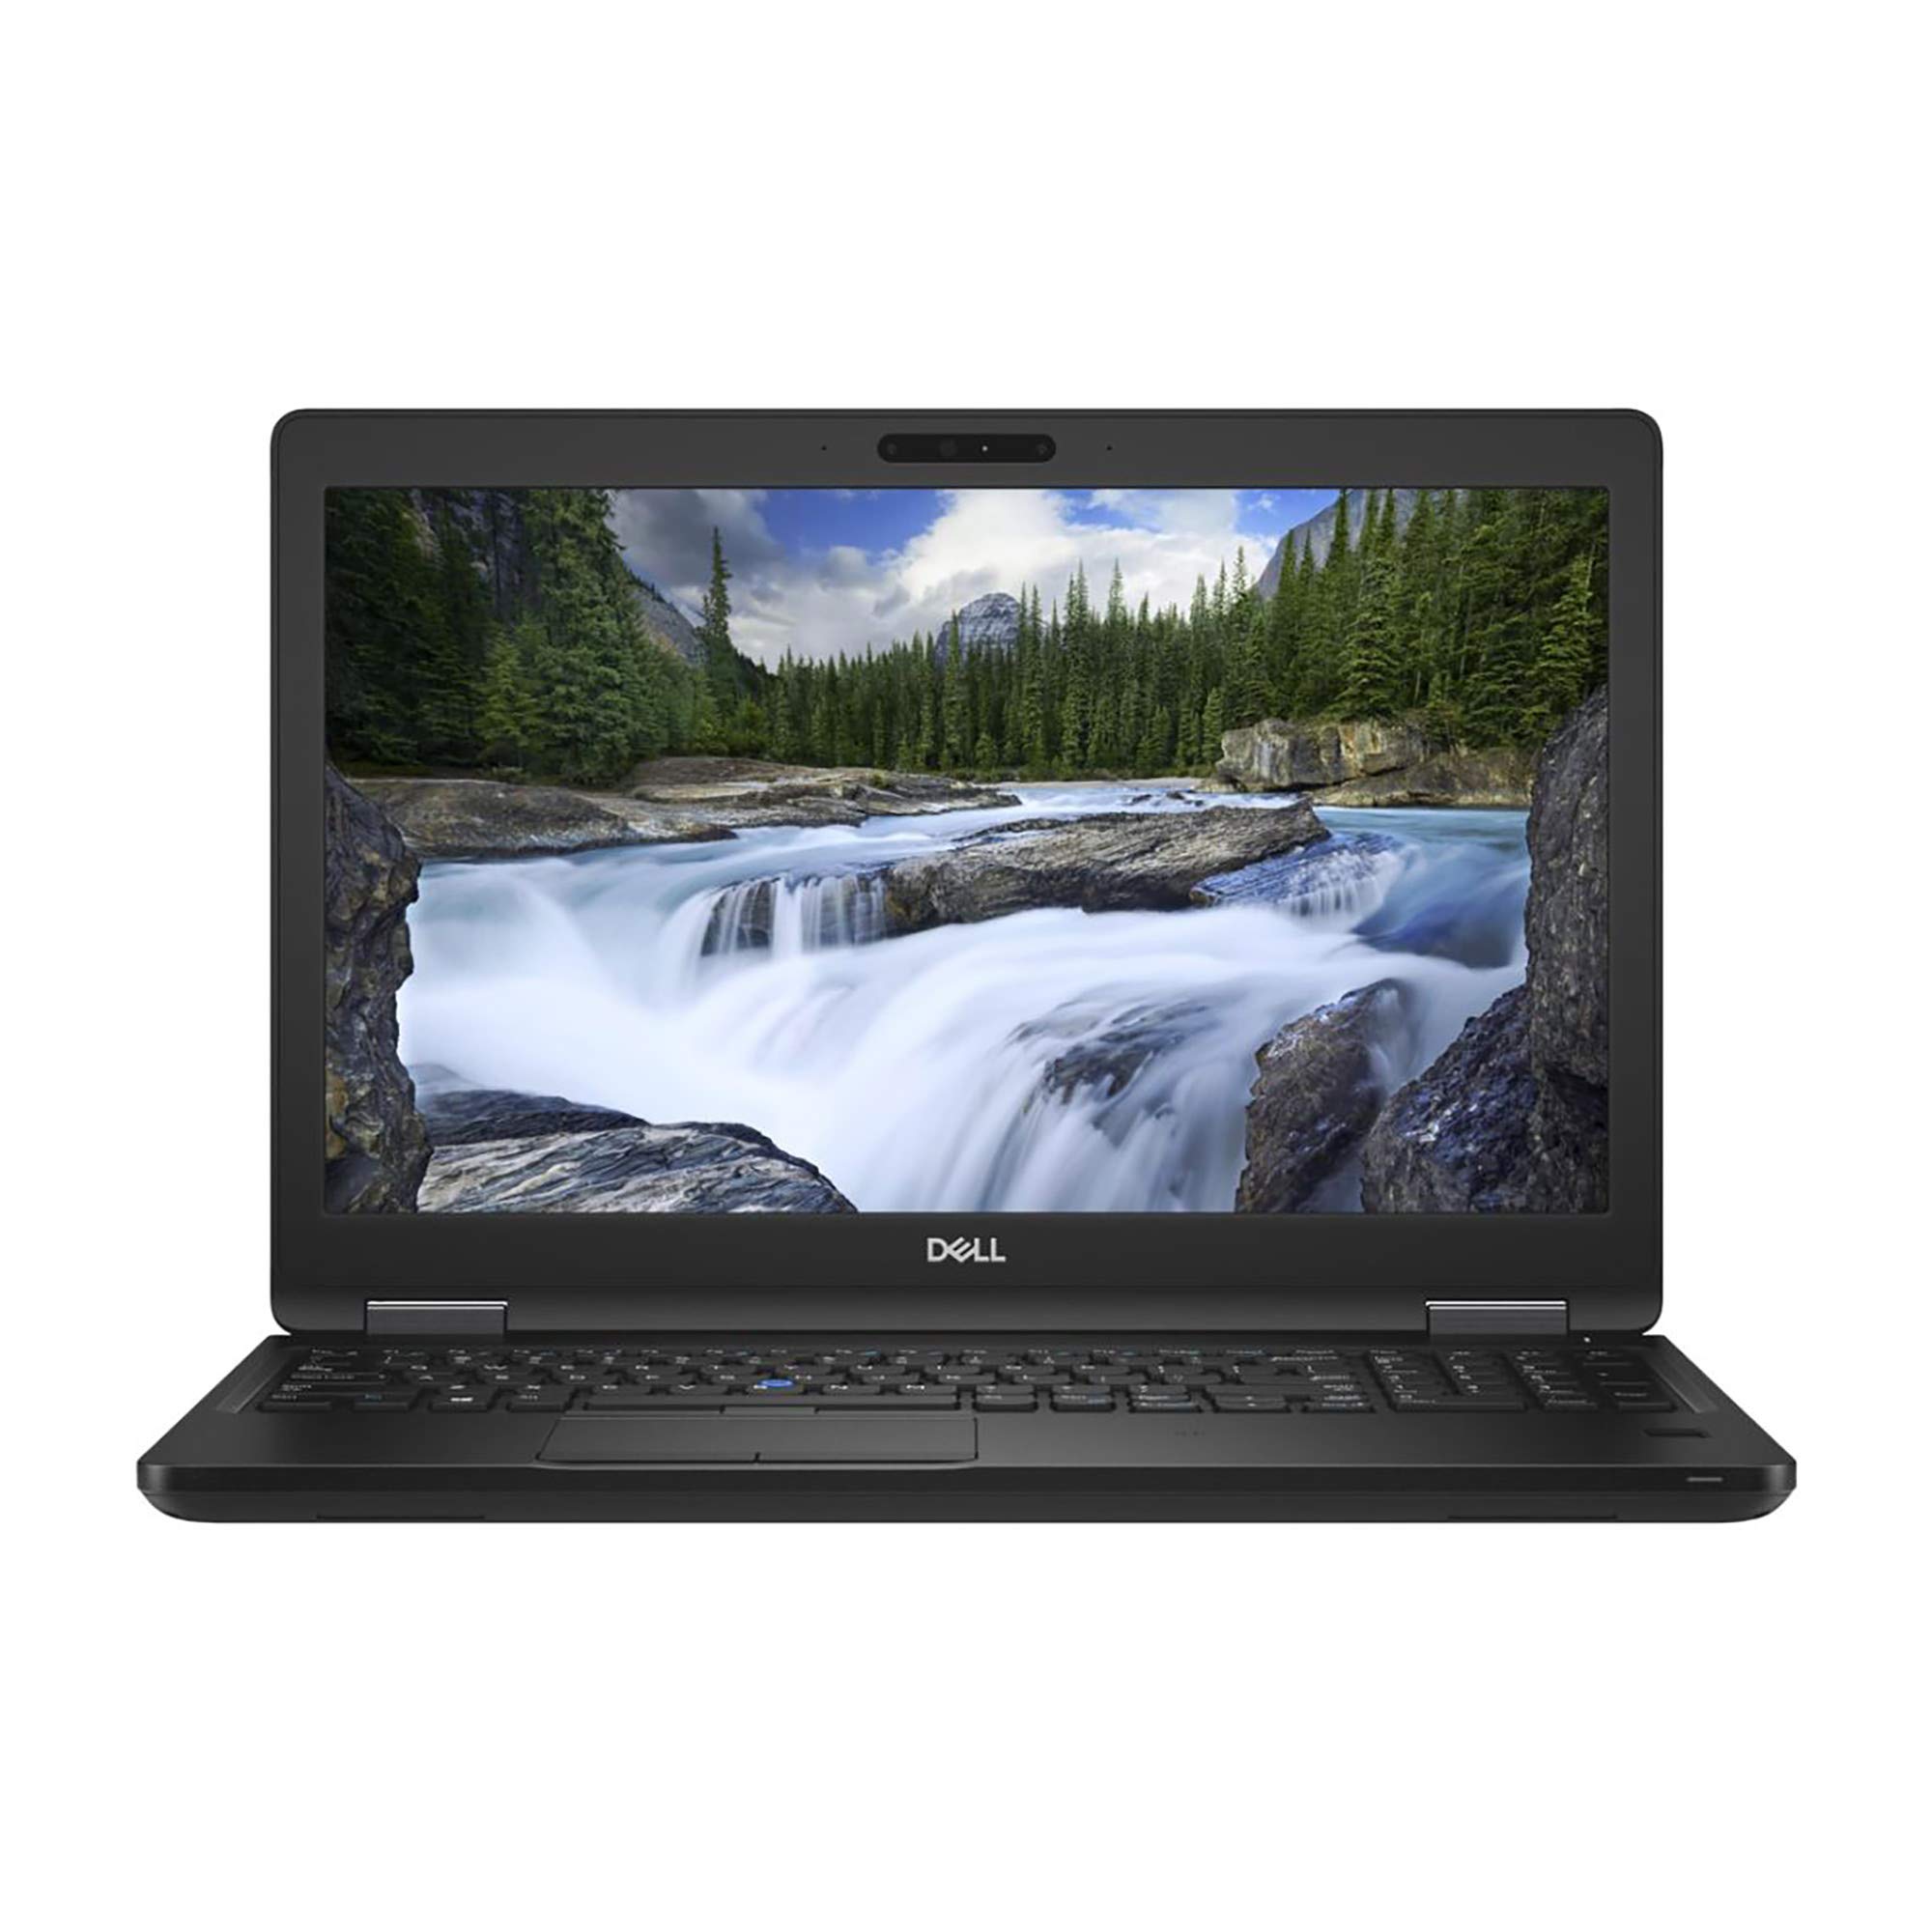 Dell Latitude 5491 1920 x 1080 LCD Laptop with Intel Core i7-8850H 2.6 GHz Hexa-Core, 16GB RAM, 512GB SSD, 14